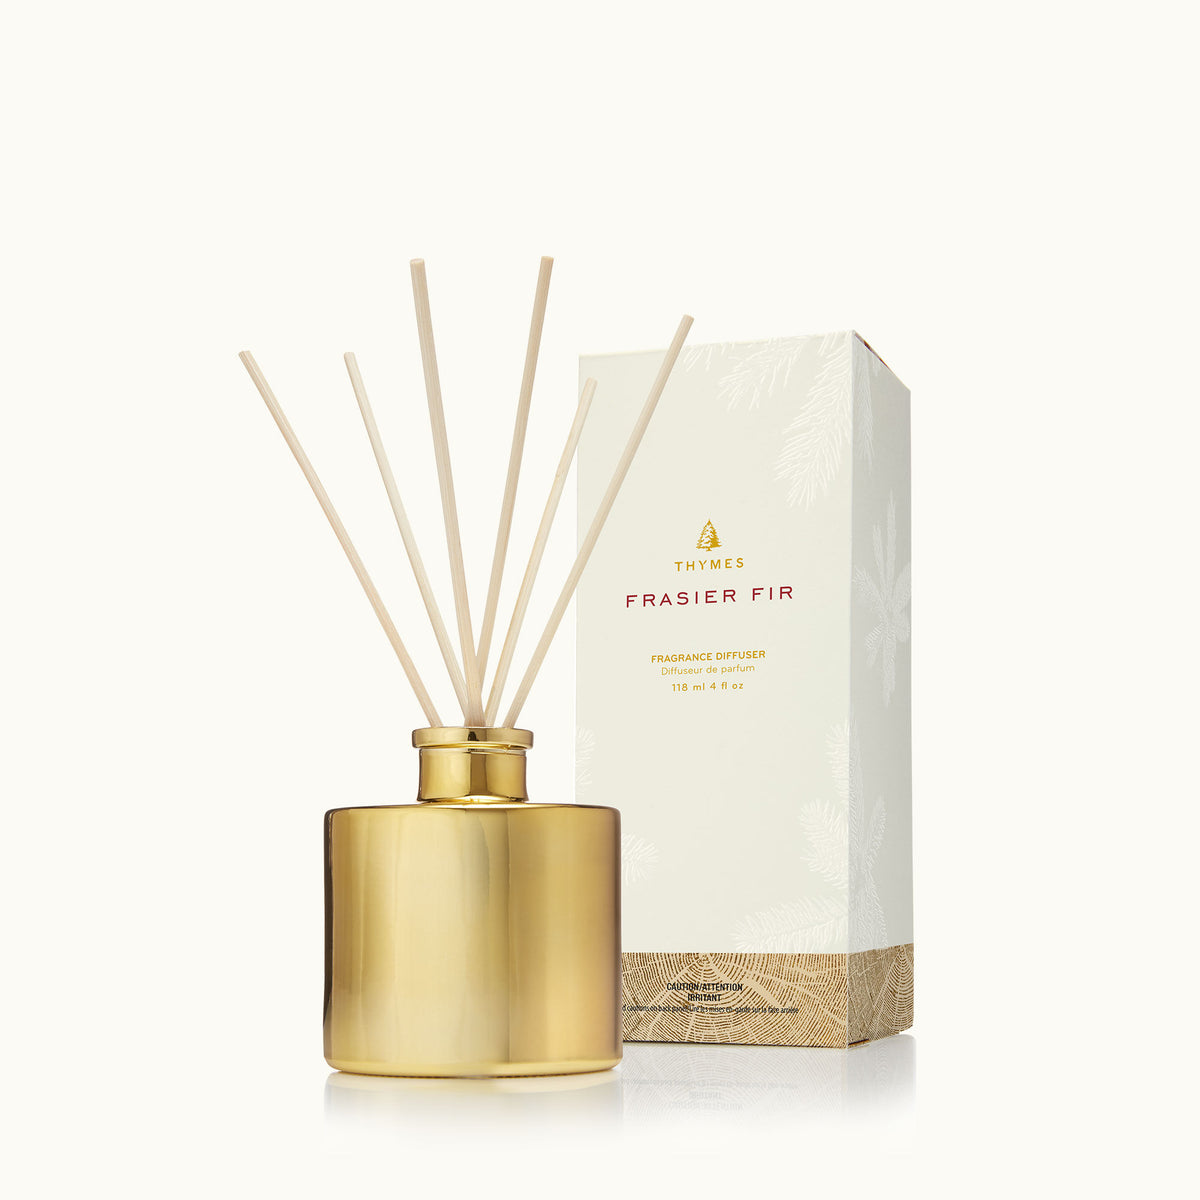 Thymes Frasier Fir Aromatic Petite Reed Diffuser Gilded